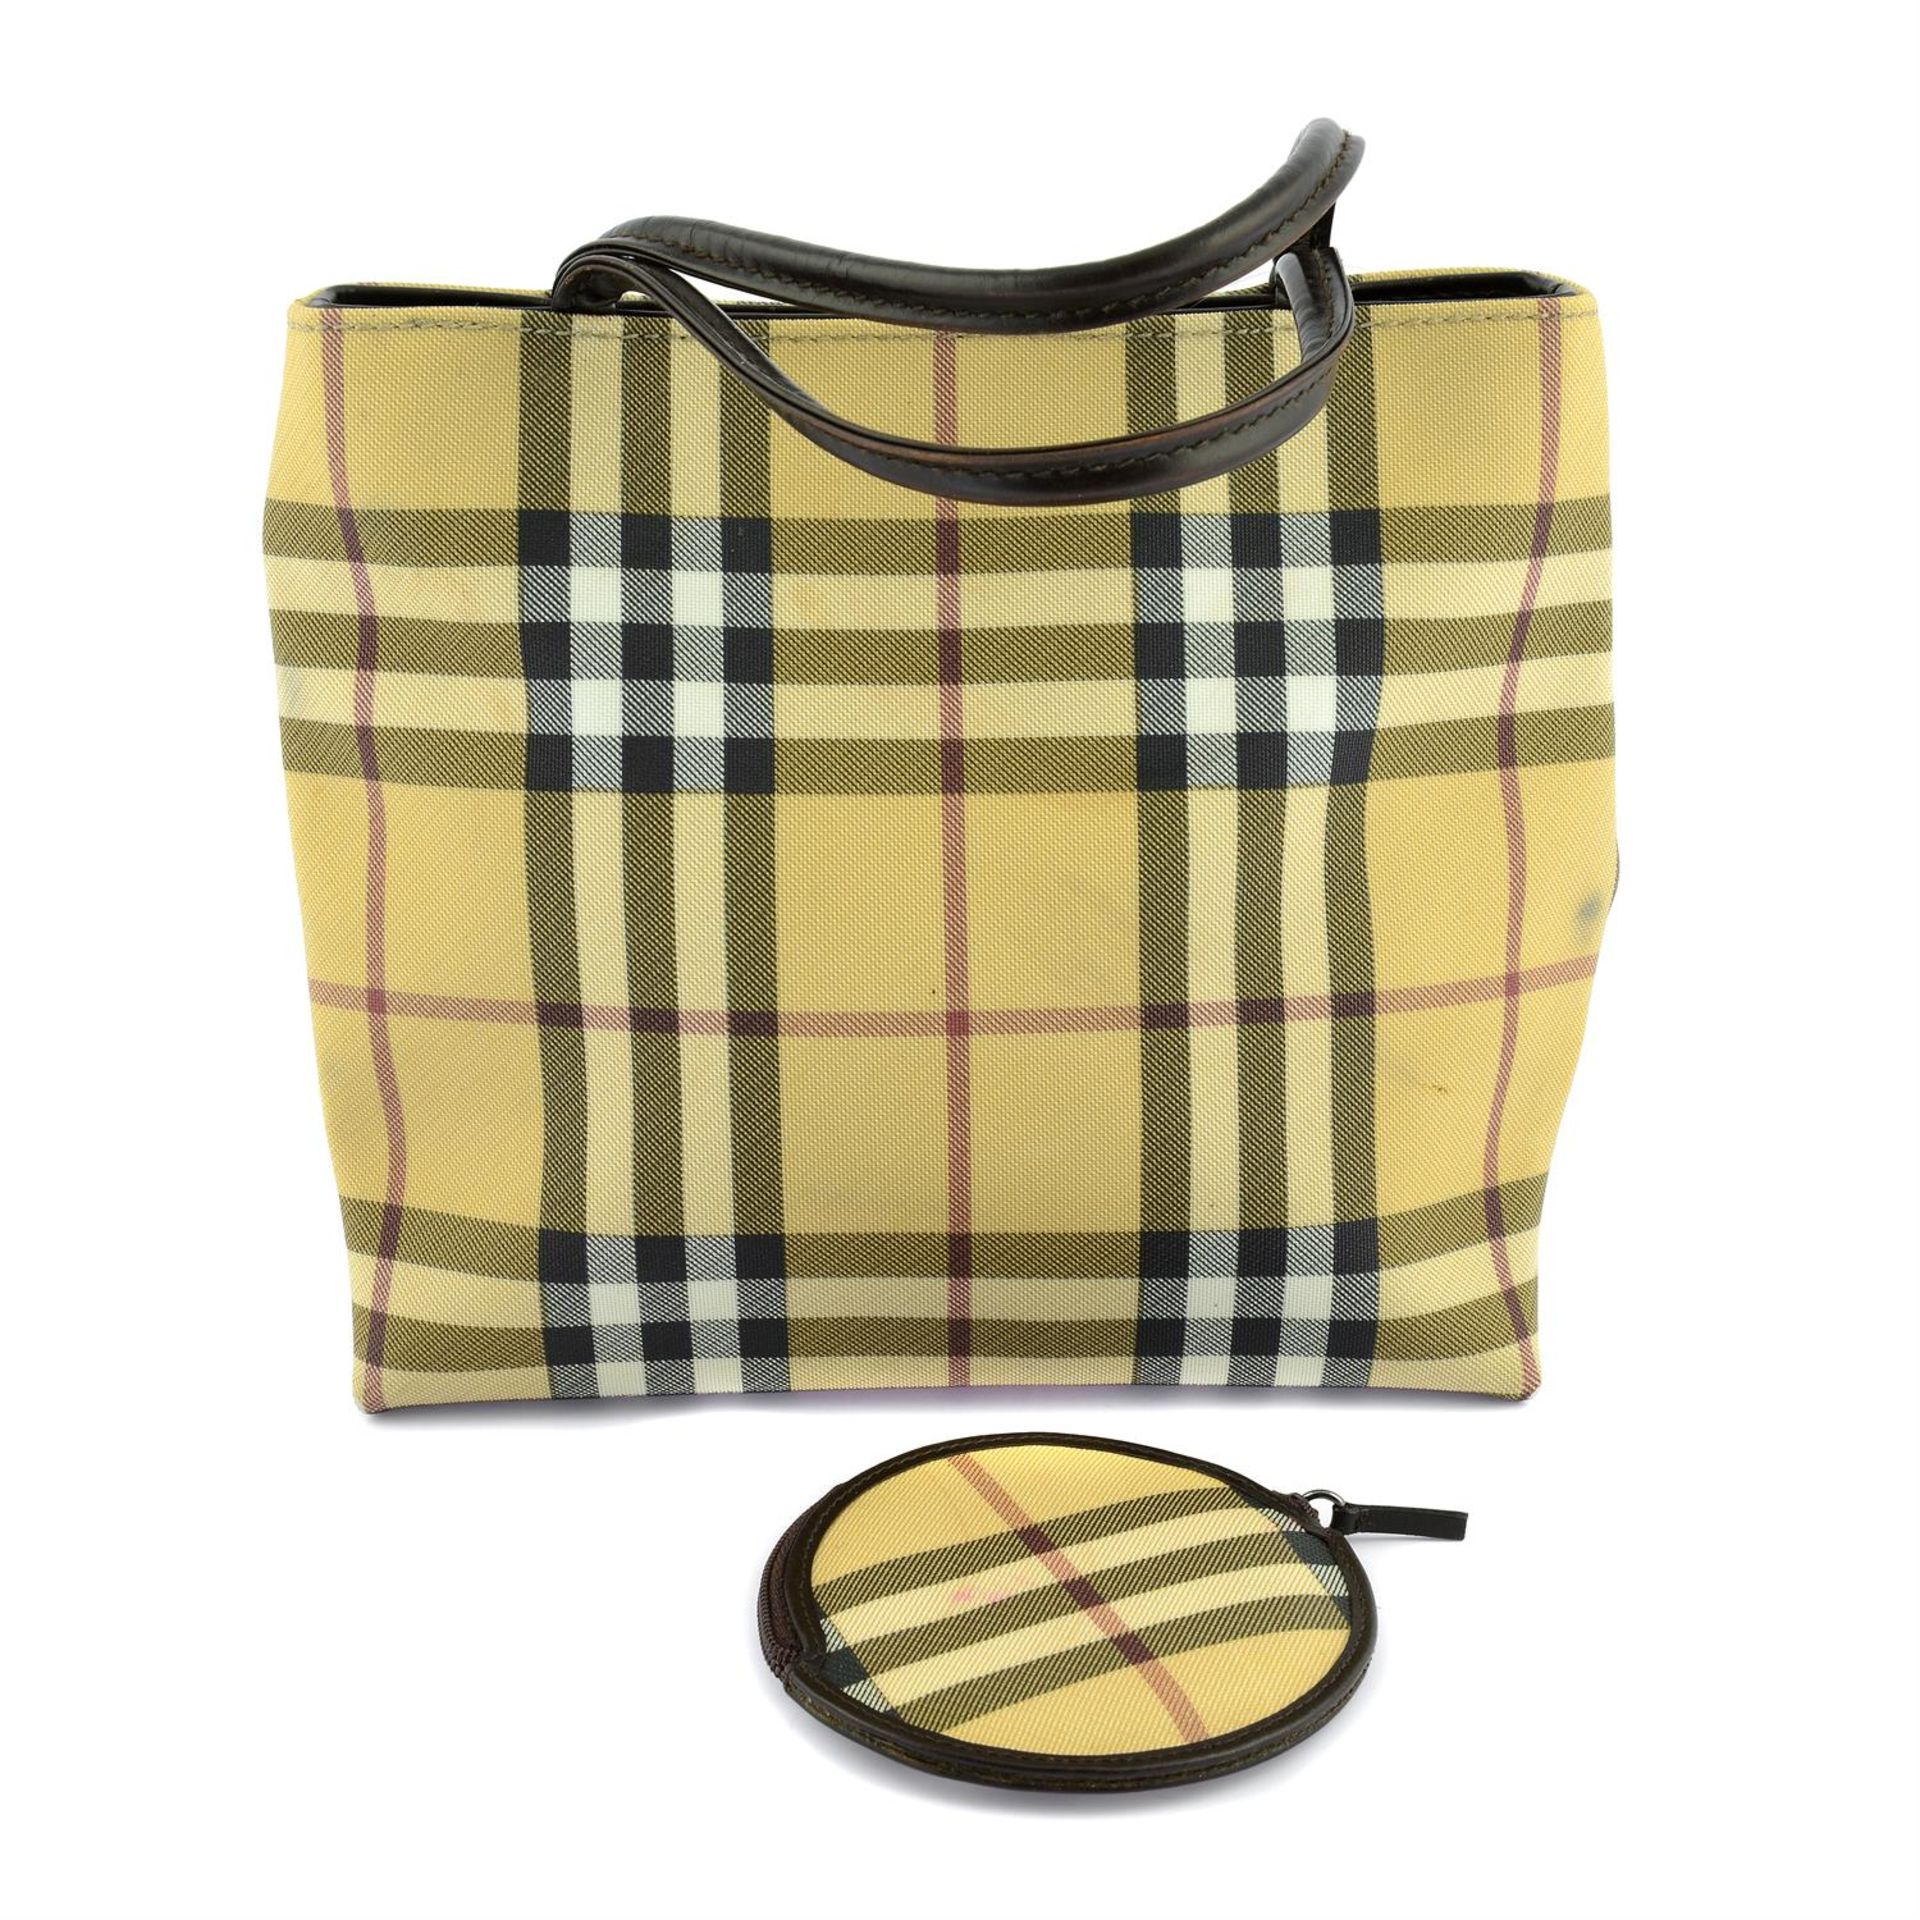 BURBERRY - a Nova check mini shopping tote with matching coin purse. - Image 2 of 6